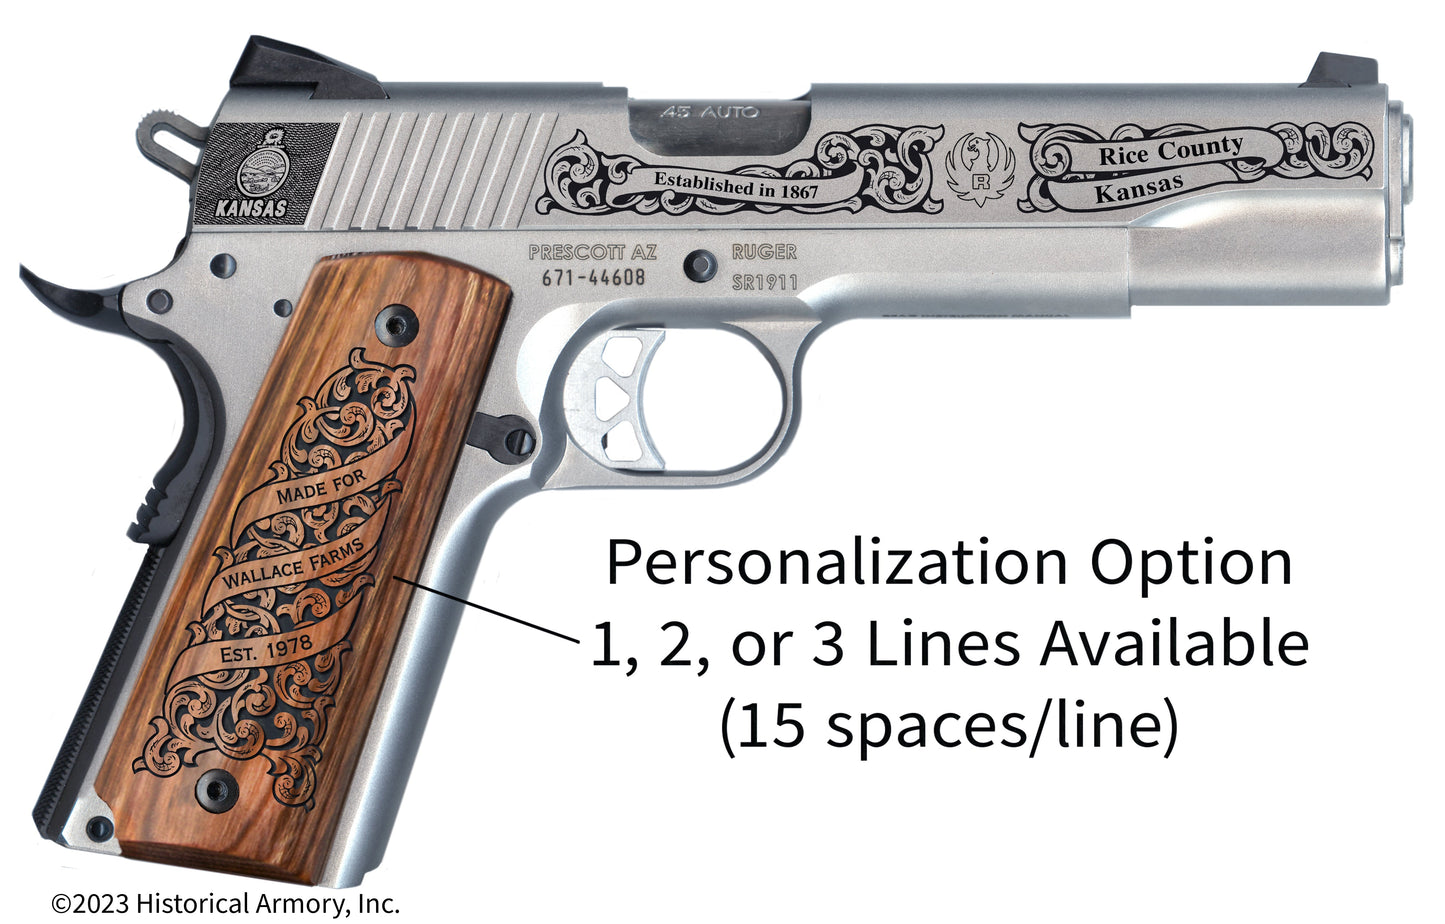 Rice County Kansas Personalized Engraved .45 Auto Ruger 1911